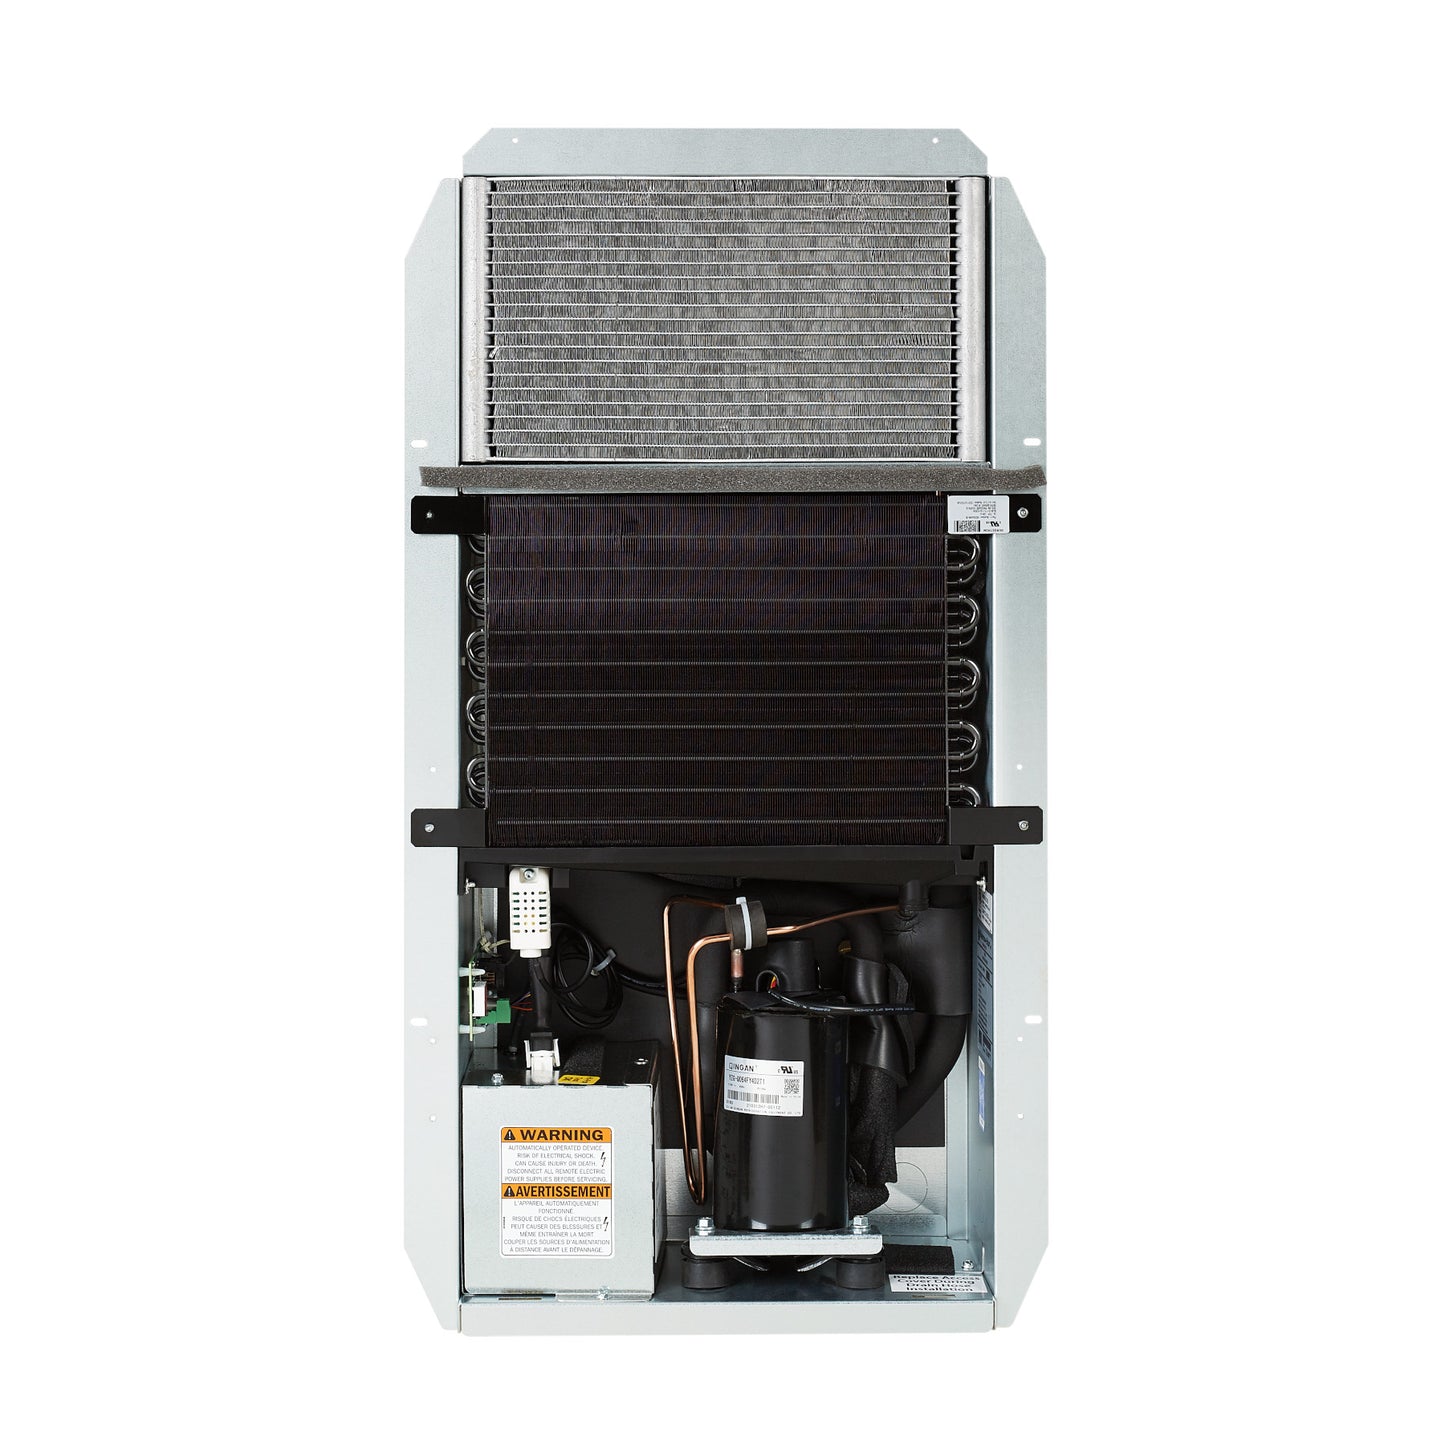 •	Water Removal Capacity @ 80F & 60% RH (pints/day): 33 * Efficiency (pints/kWh): 4.25 * Energy Factor (liters/kWh): 2 * Power (Watts) @ 80°F & 60% RH: 324 * Integrated Circuit Breaker: No * Refrigerant Type: R134A * Refrigerant Qty (oz.): 10 * Drain Connection: 3/4" O.D. * Coverage (sq. ft): 1200